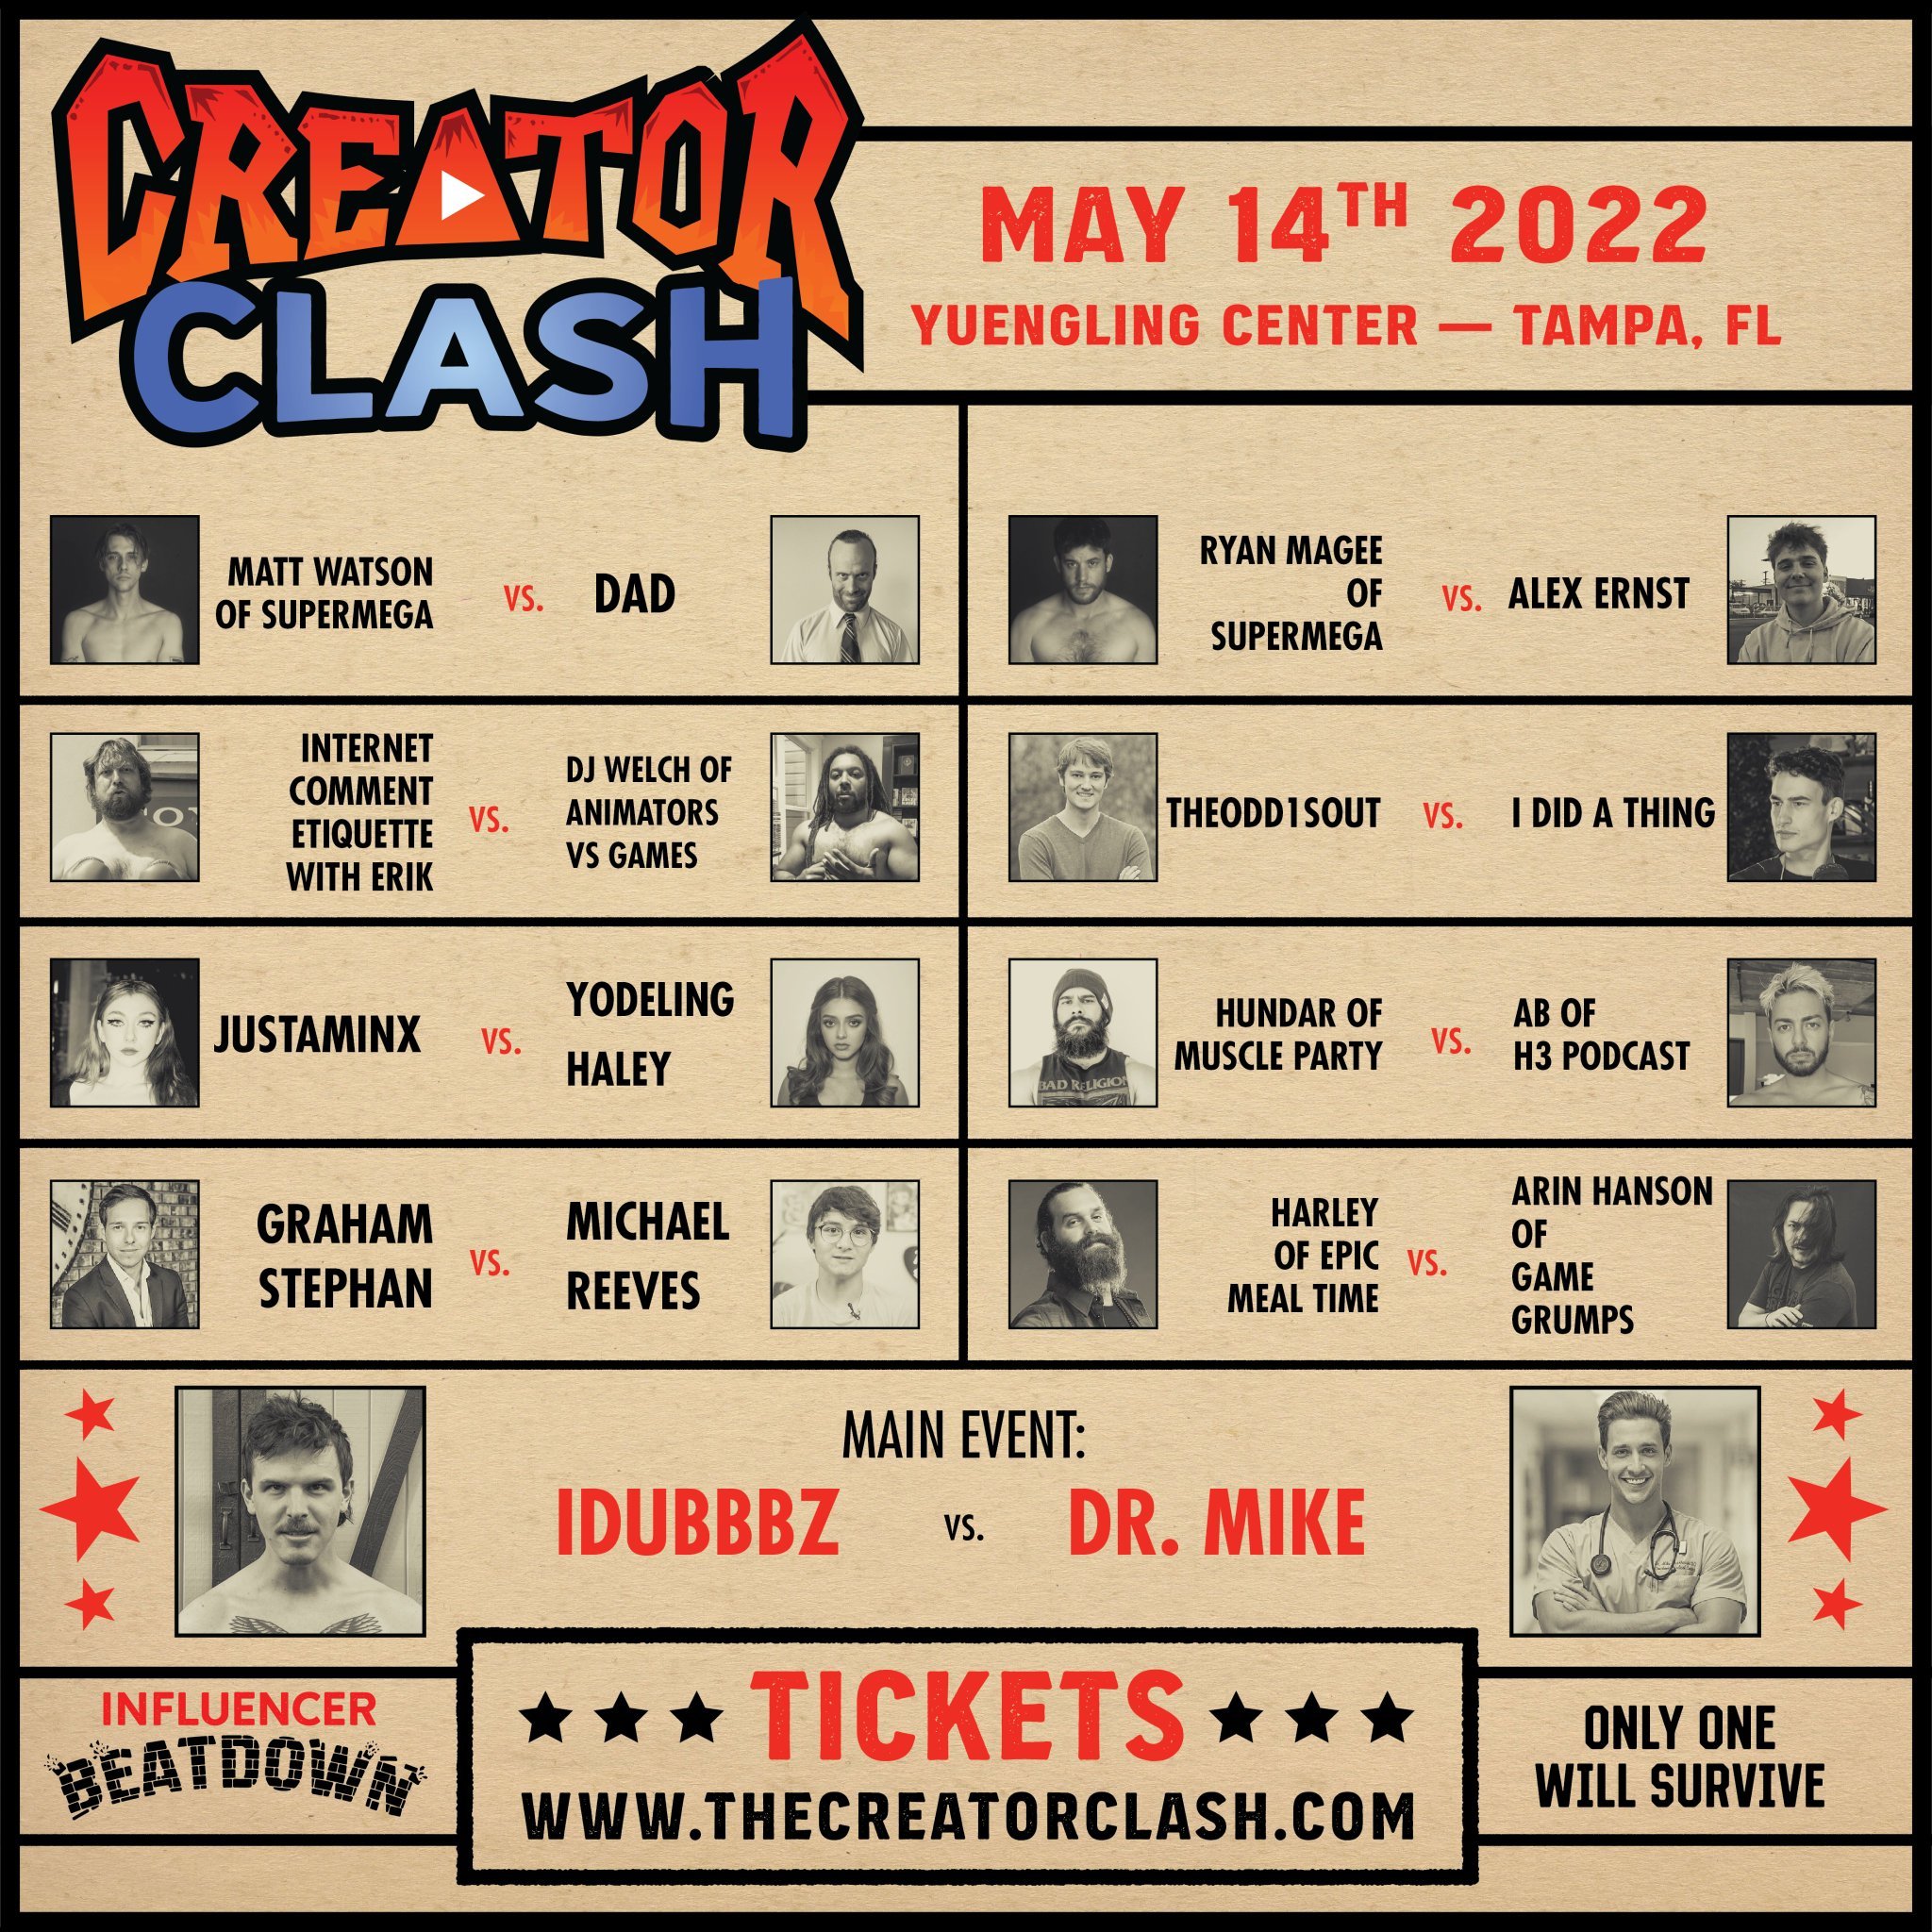 Creator Clash: An Astounding Crowd Elevates An Influencer Boxing Event